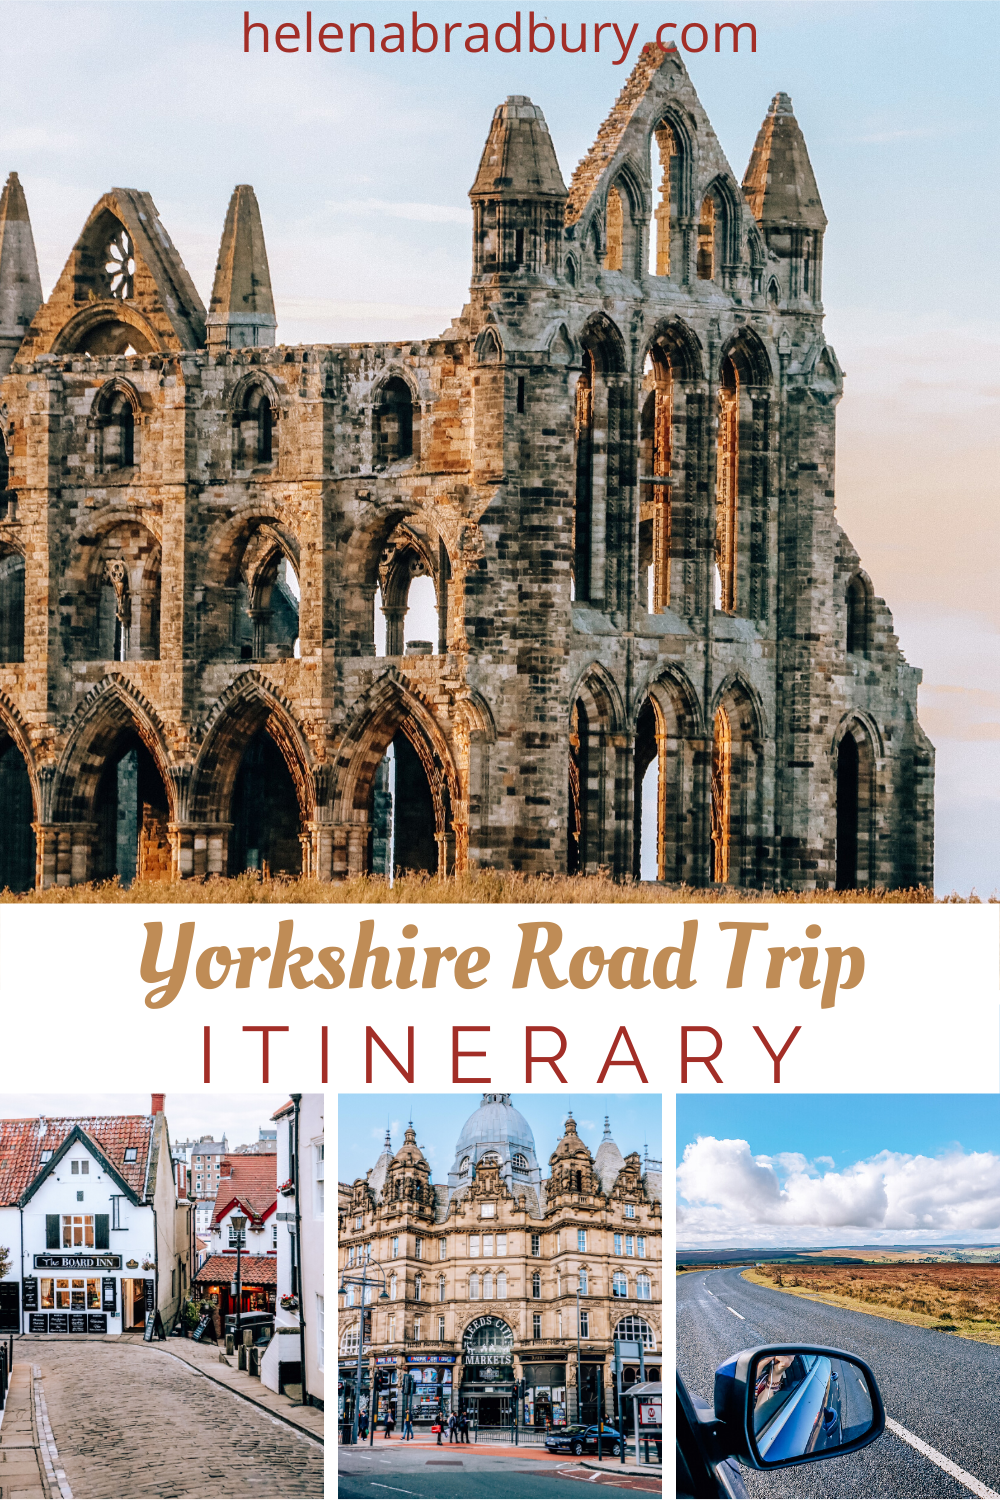 Road trips around England: 4 day Yorkshire Road Trip | Helena Bradbury travel blog | northern england itinerary | England road trip itinerary | road trips in the UK | road trips around england | best english road trips | driving routes UK | best roa…